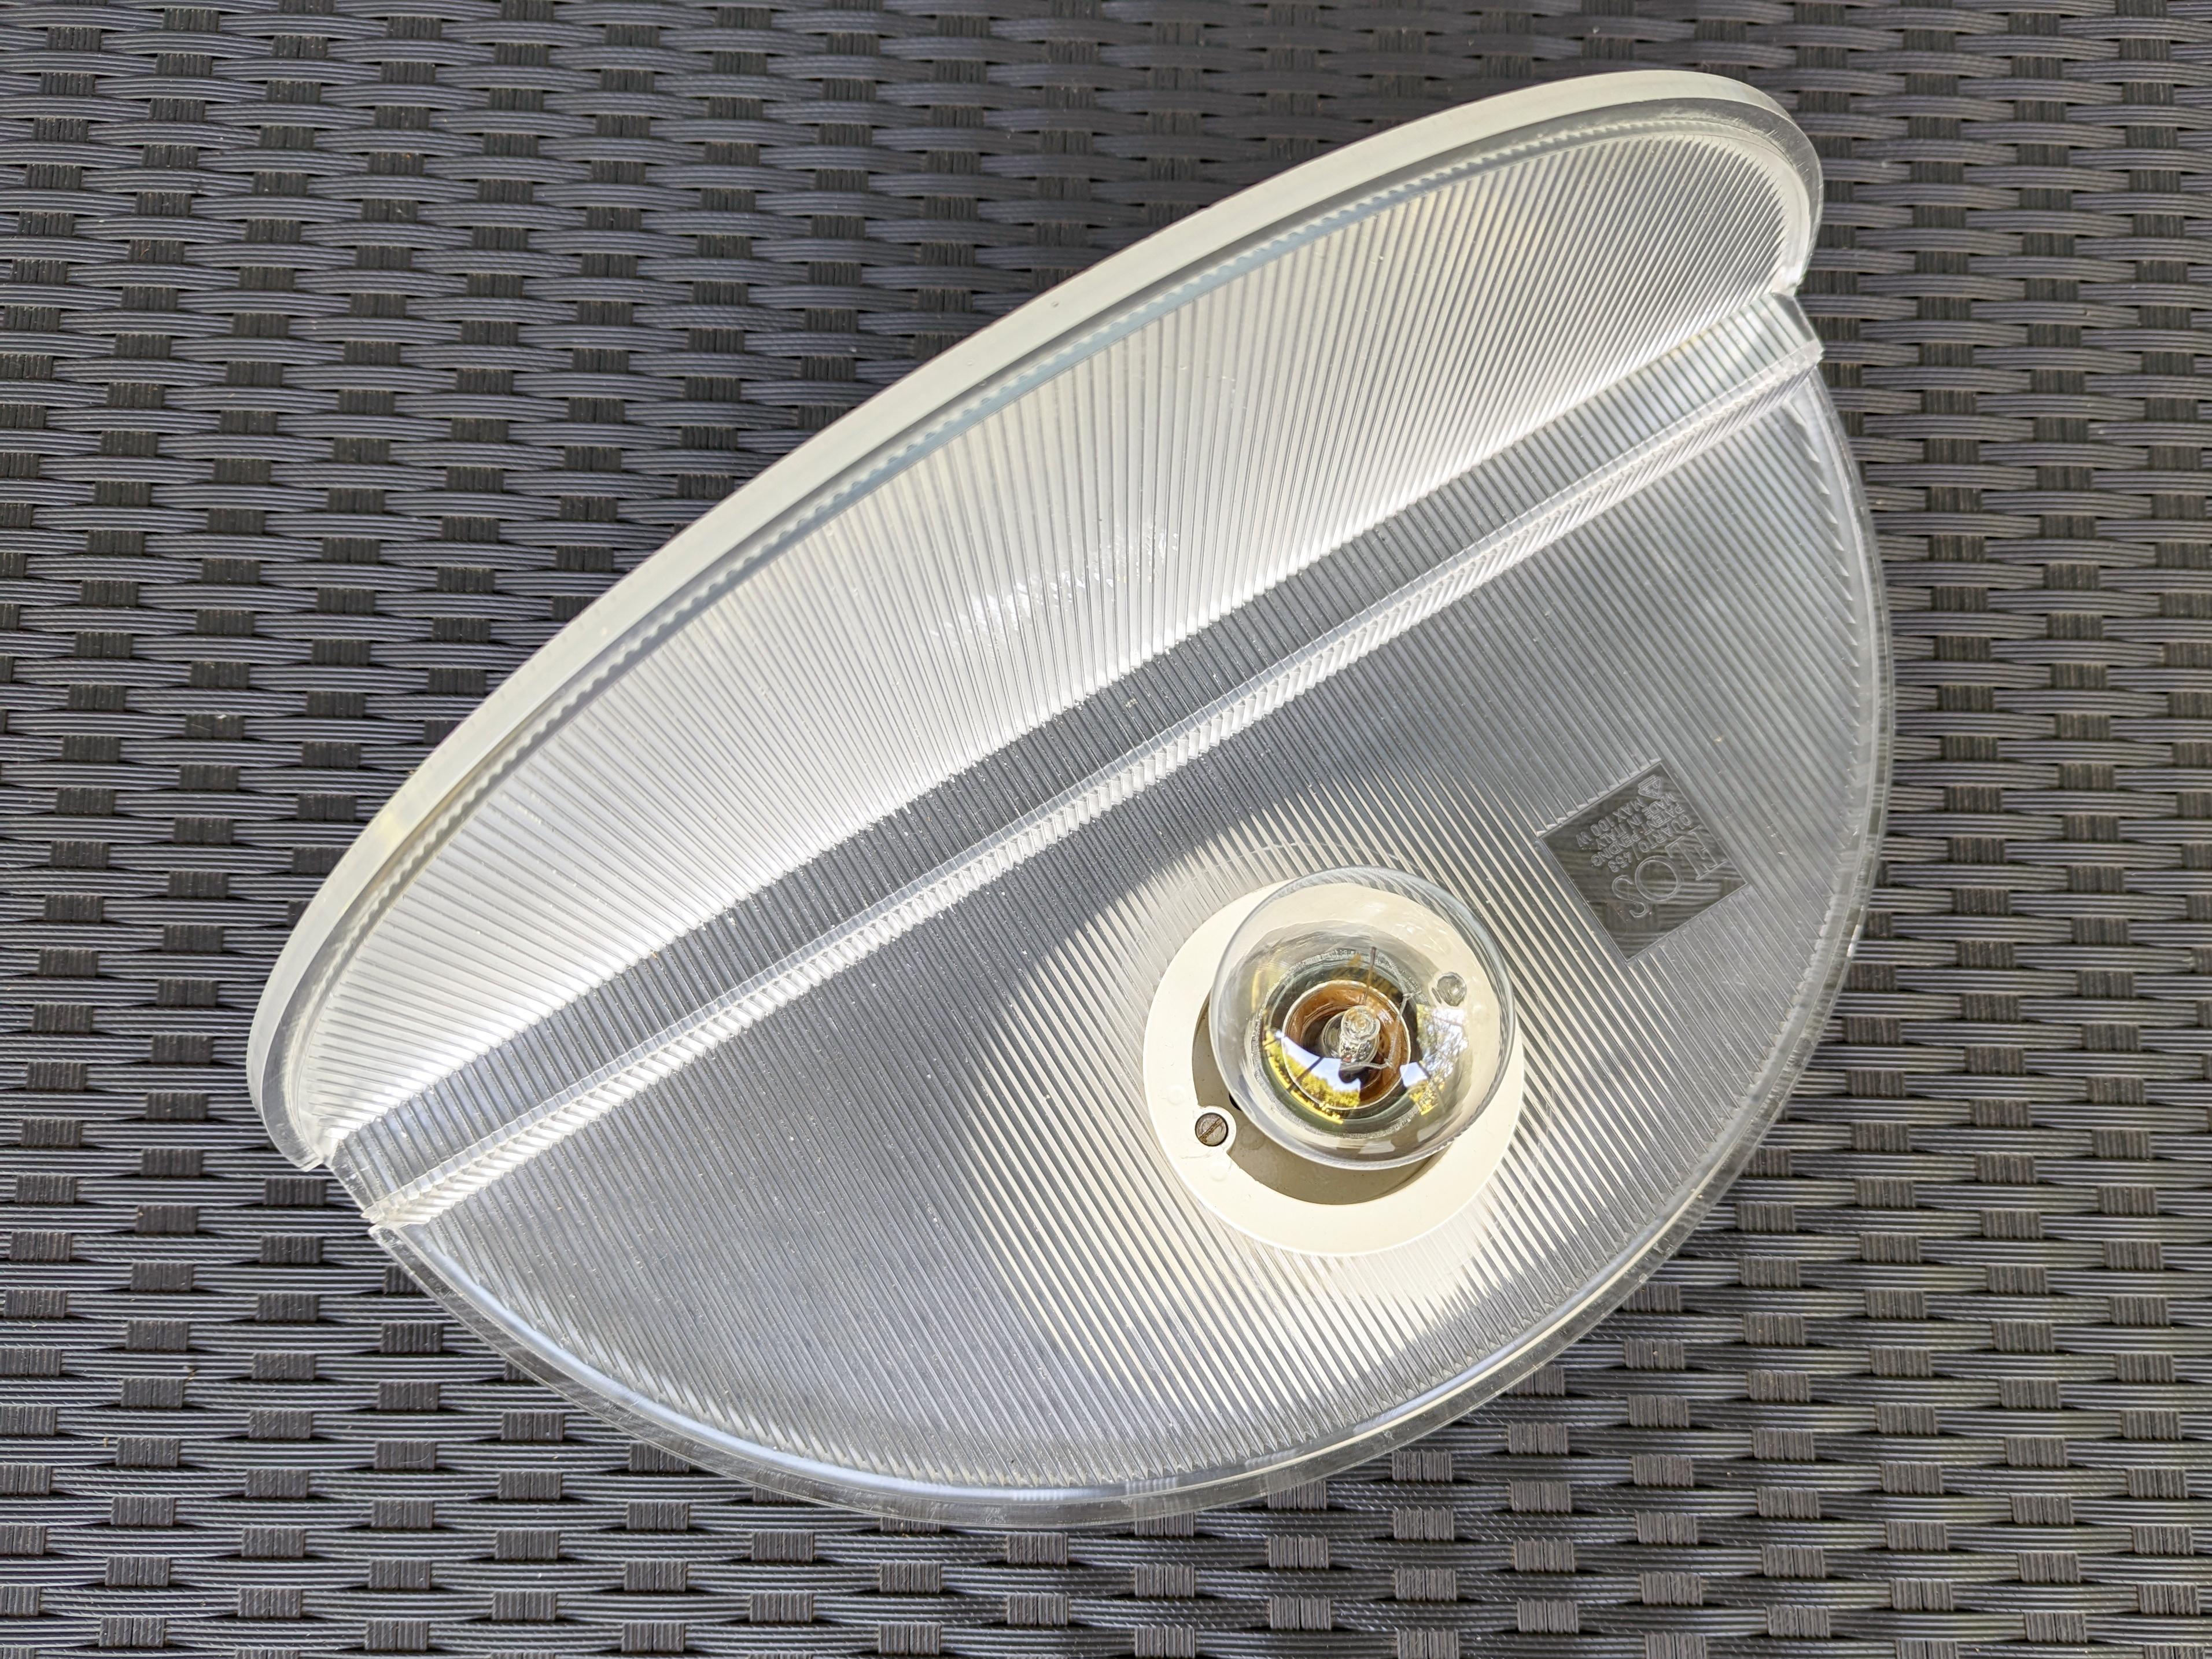 Painted White Metal & clear Polycarbonate Quarto sconce by A. & T. Scarpa for FLos